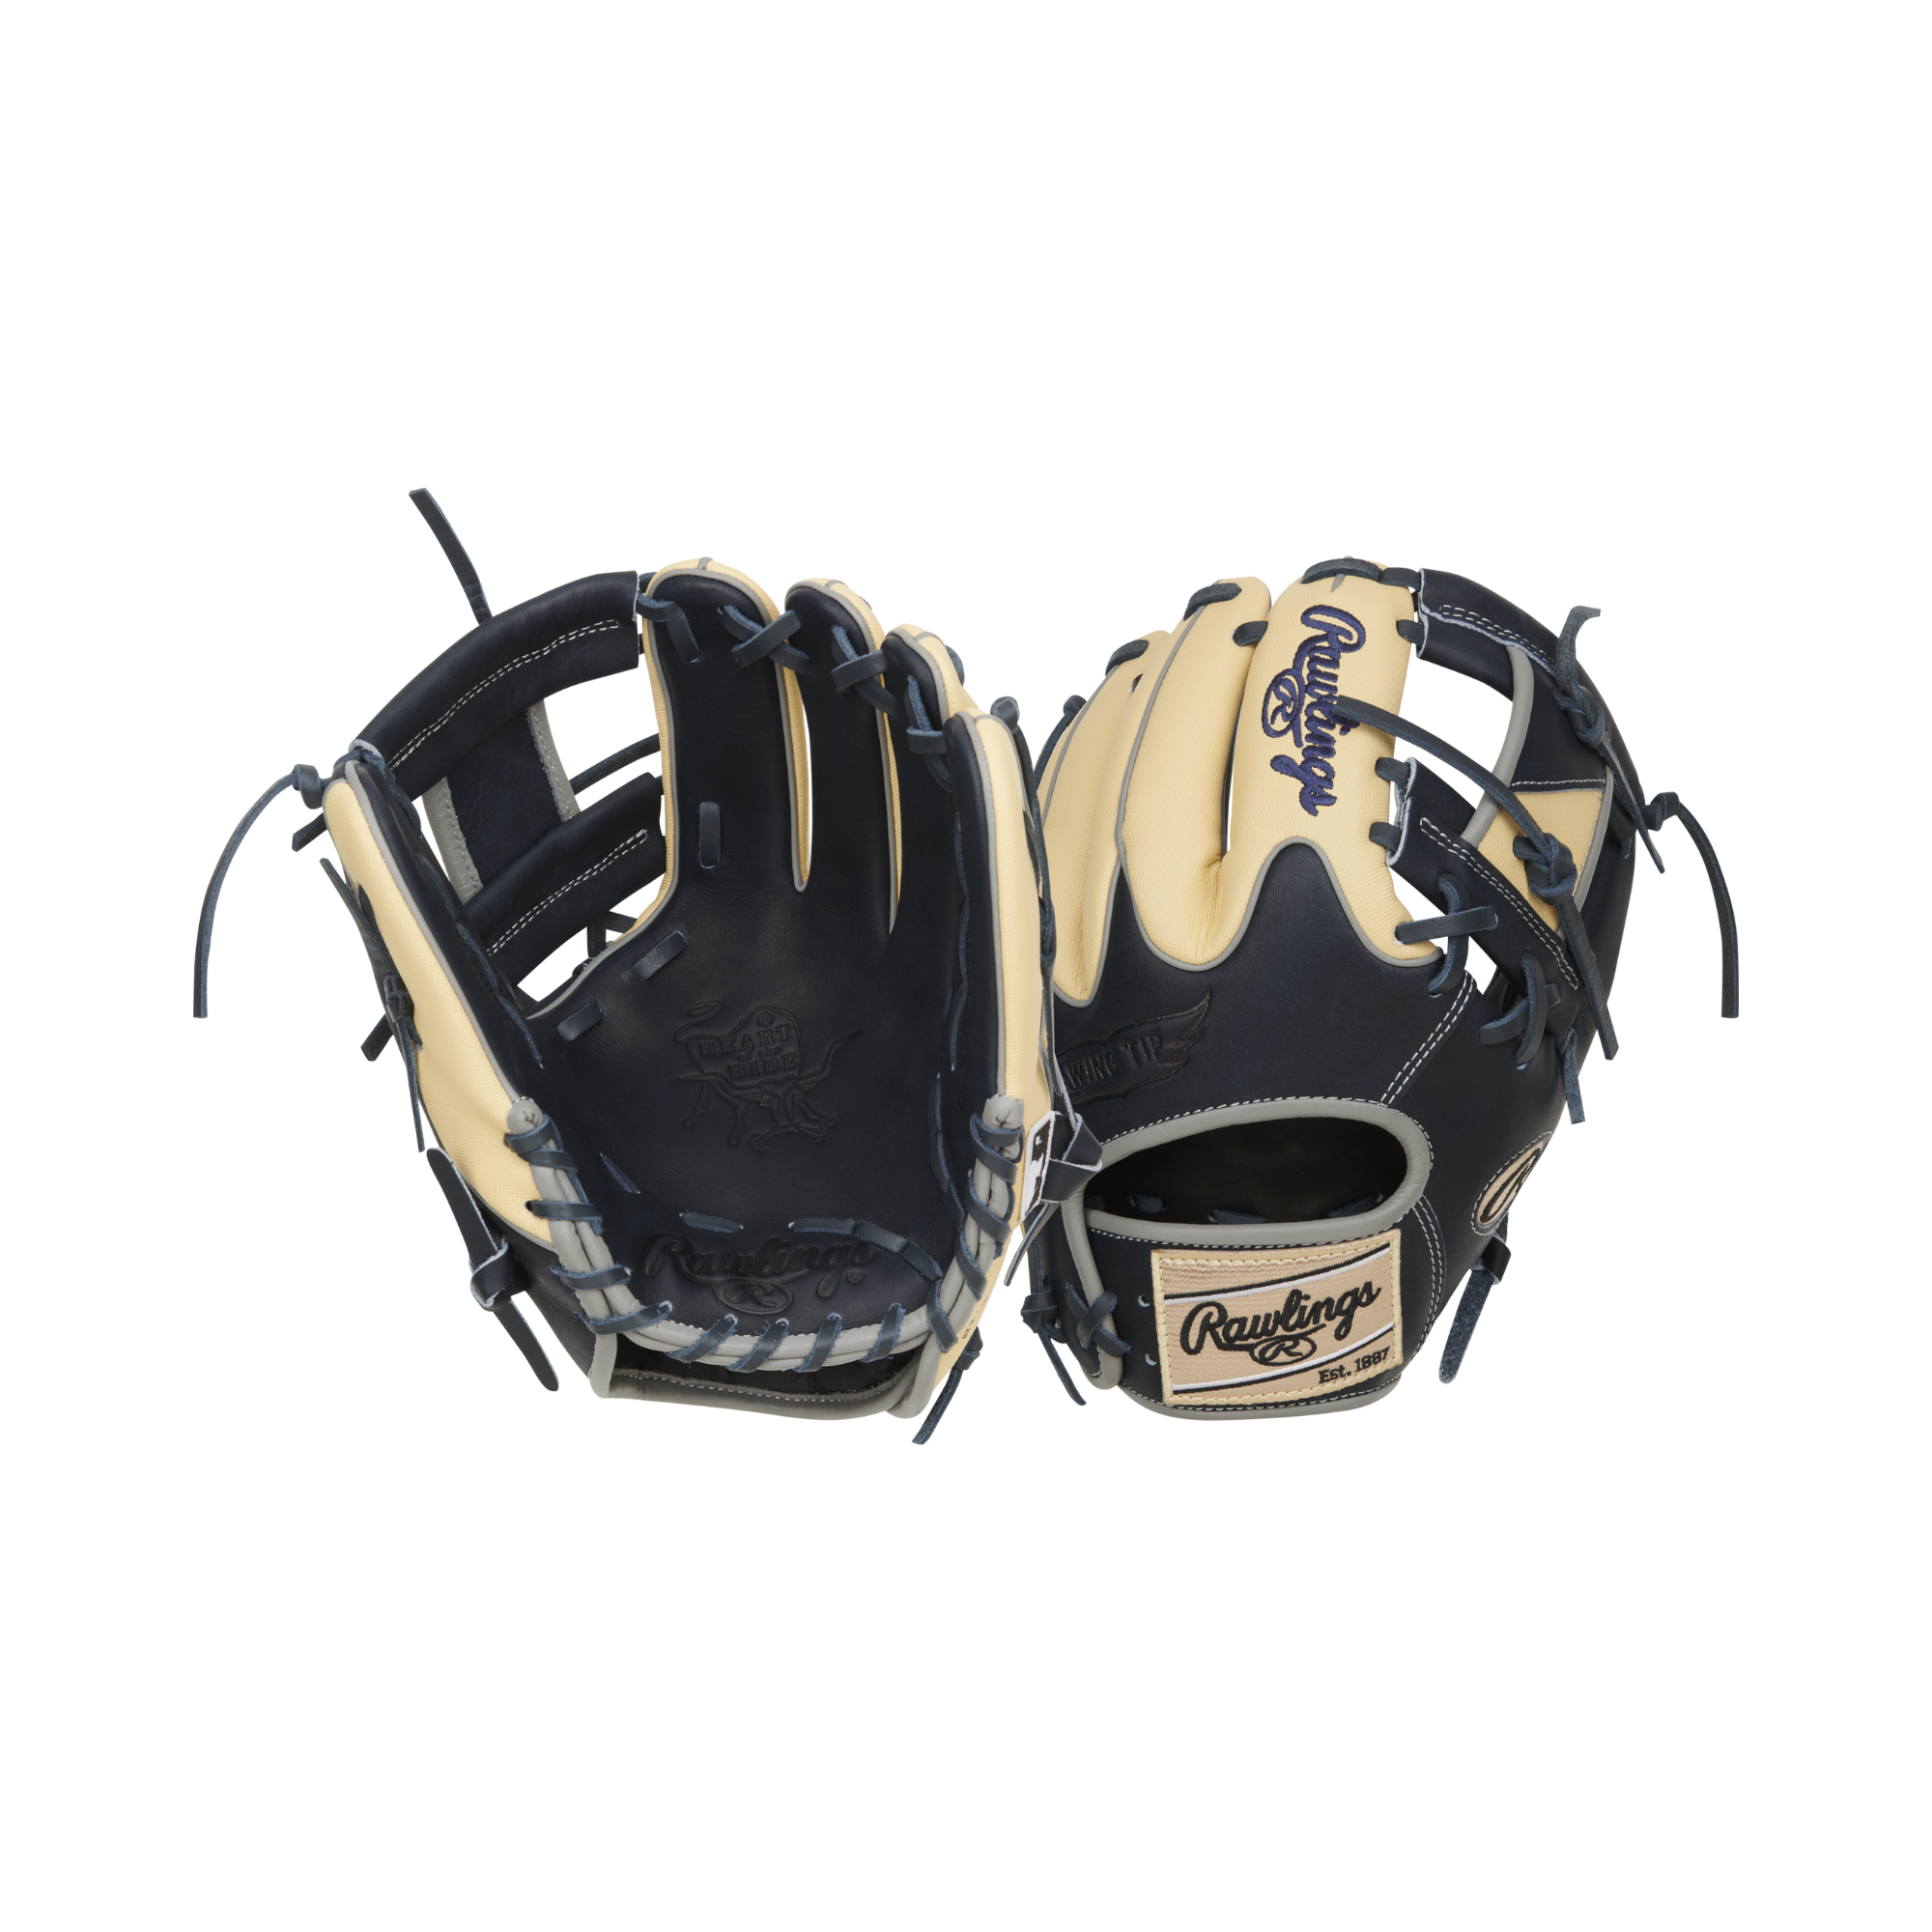 Rawlings Heart Of the Hide Color Sync 8.0 Baseball Glove PRO204W-2XNSS 11.5" RHT